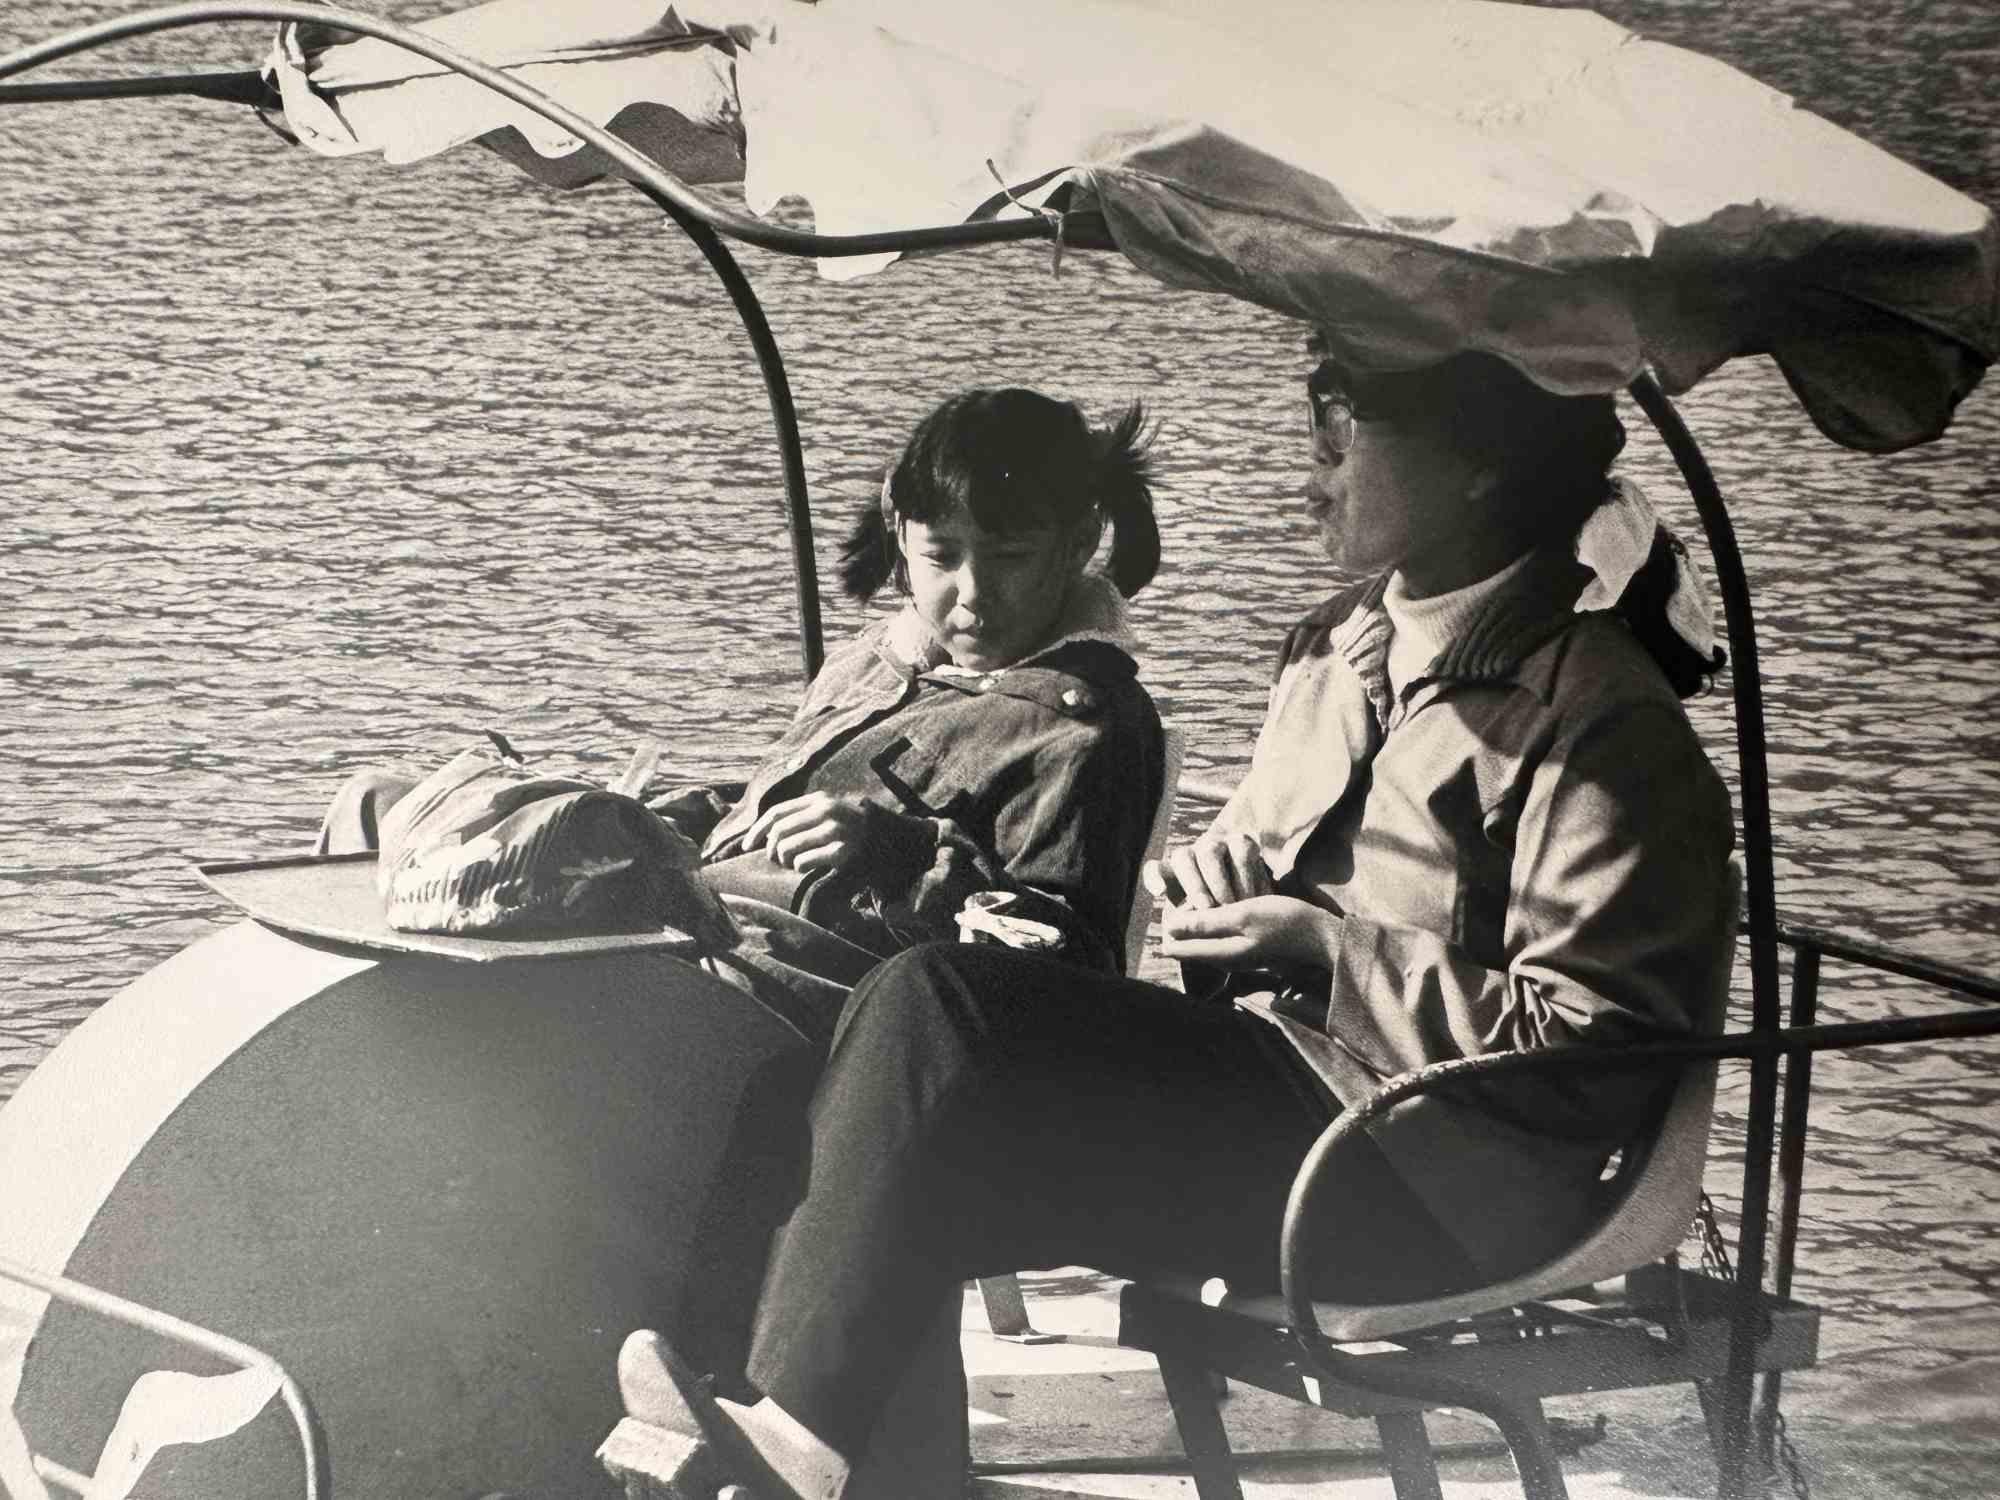 Unknown Figurative Photograph - Historical Photo - On the Lake in China - Vintage photo - 1970s